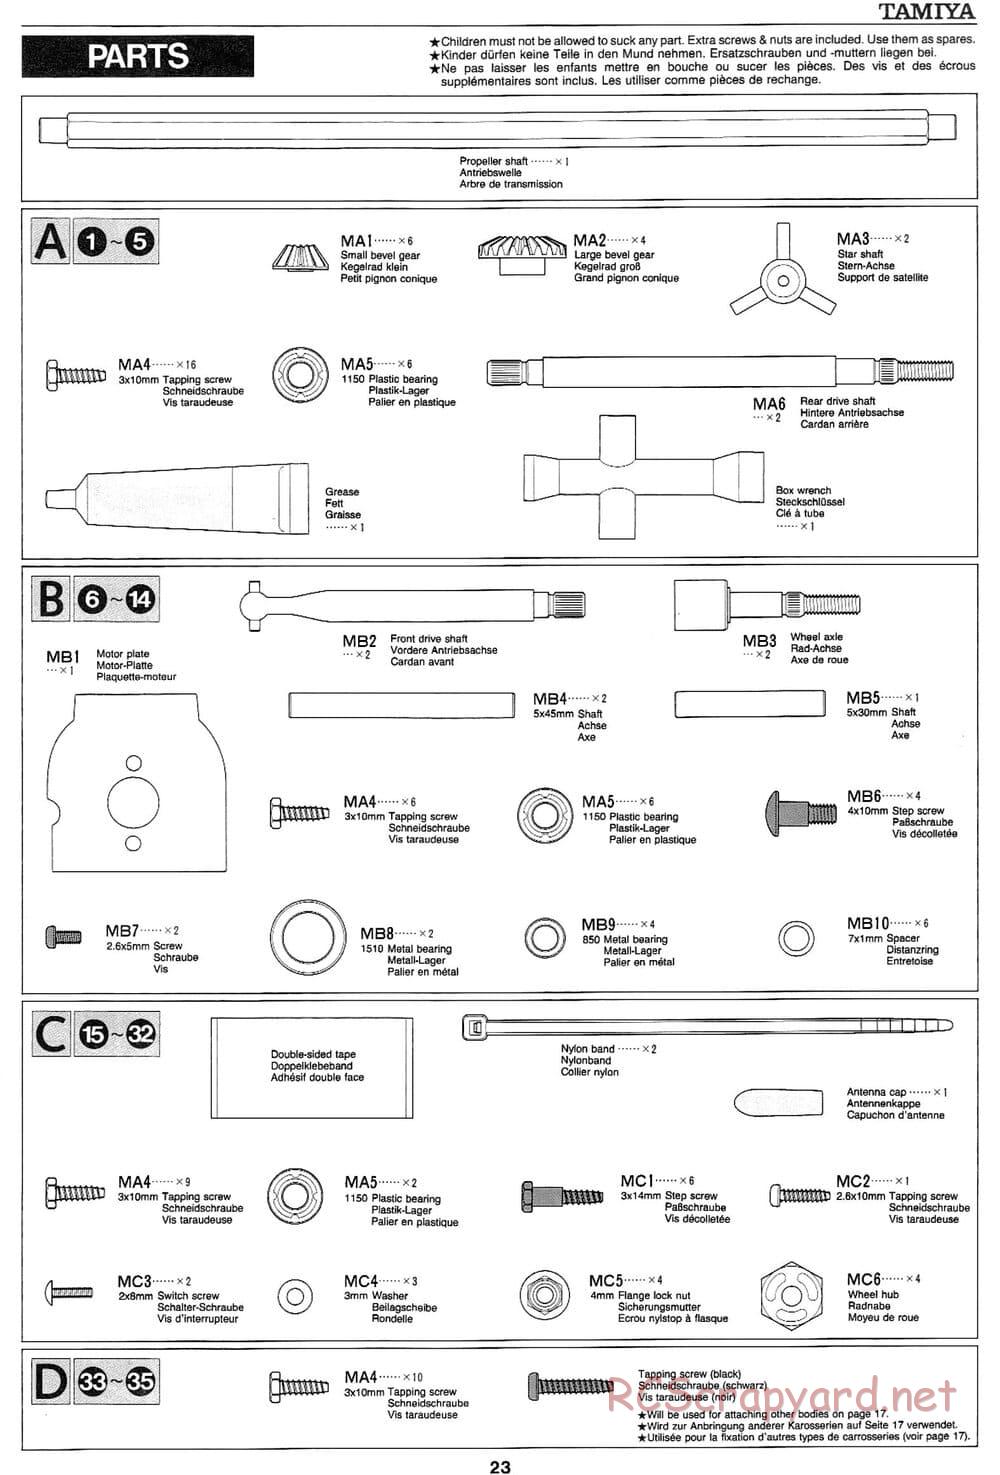 Tamiya - Wild Ceptor - Boy's 4WD Chassis - Manual - Page 23